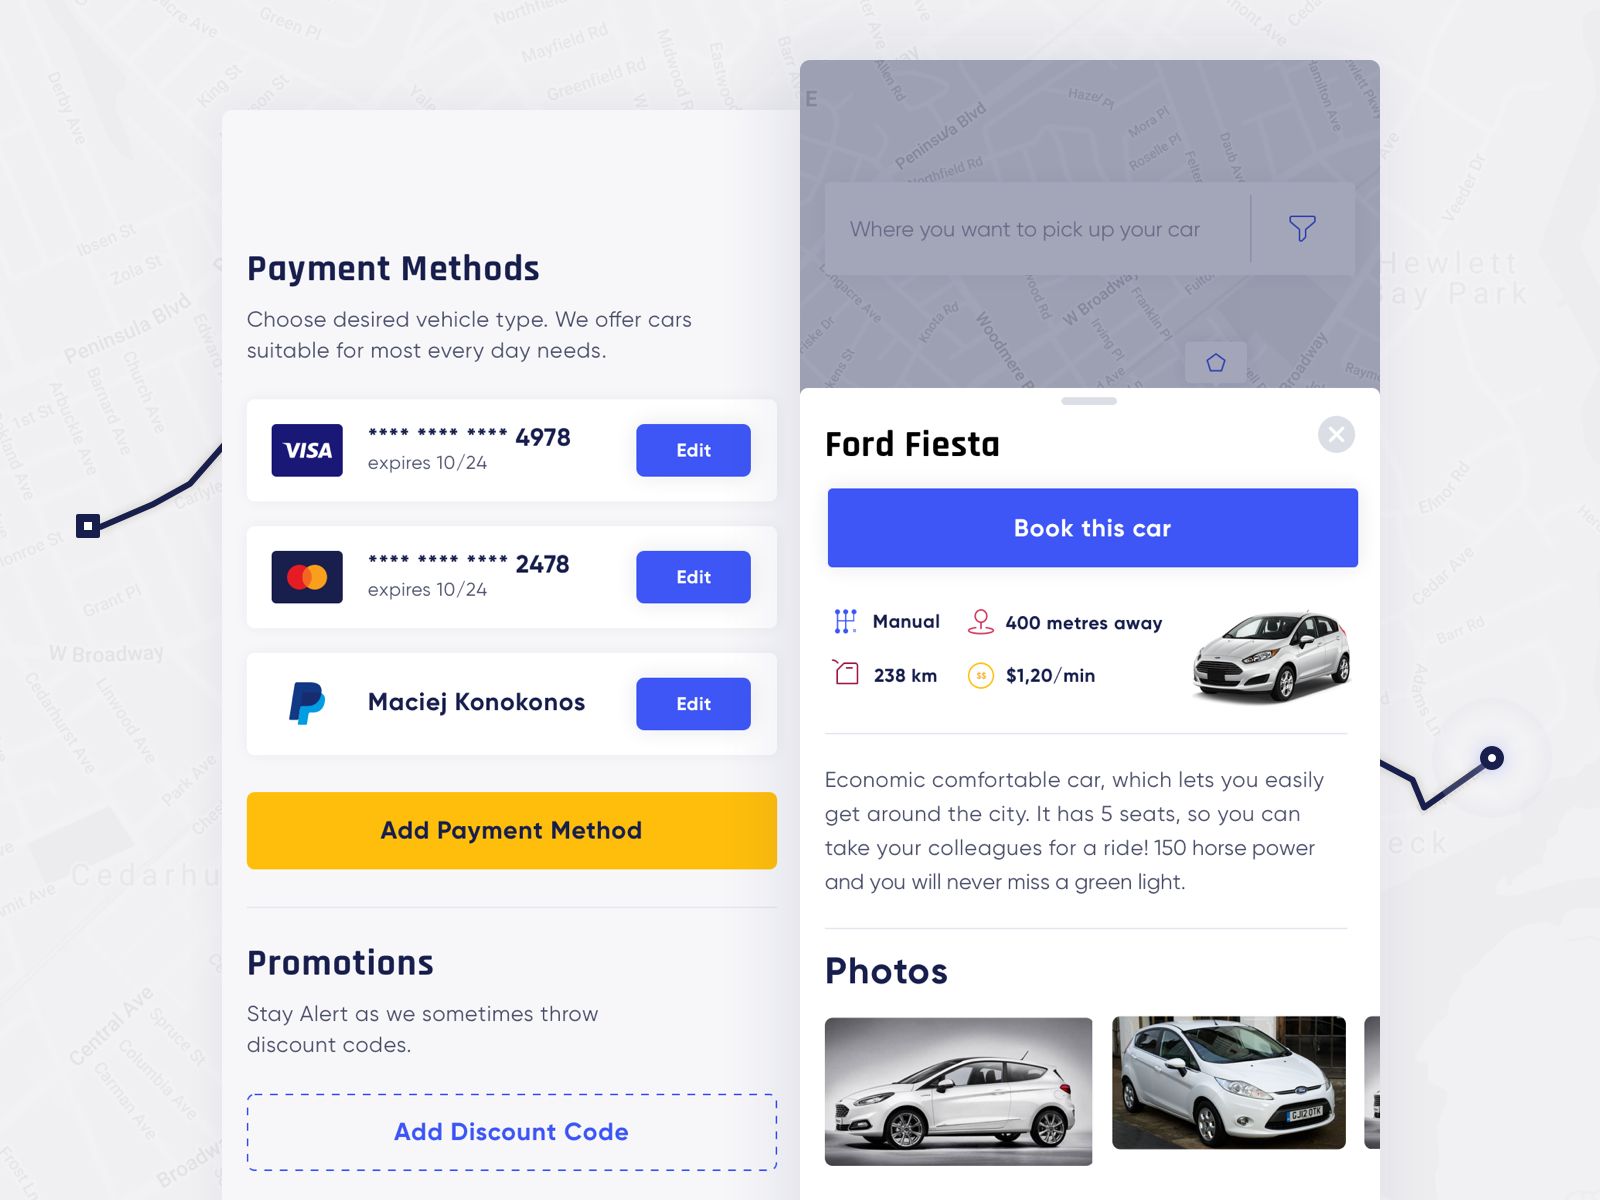 A clear payment gateway should encourage users to finish their bookings (*image by [Maciej Kownacki](https://dribbble.com/elefantus){ rel="nofollow" .default-md}*)